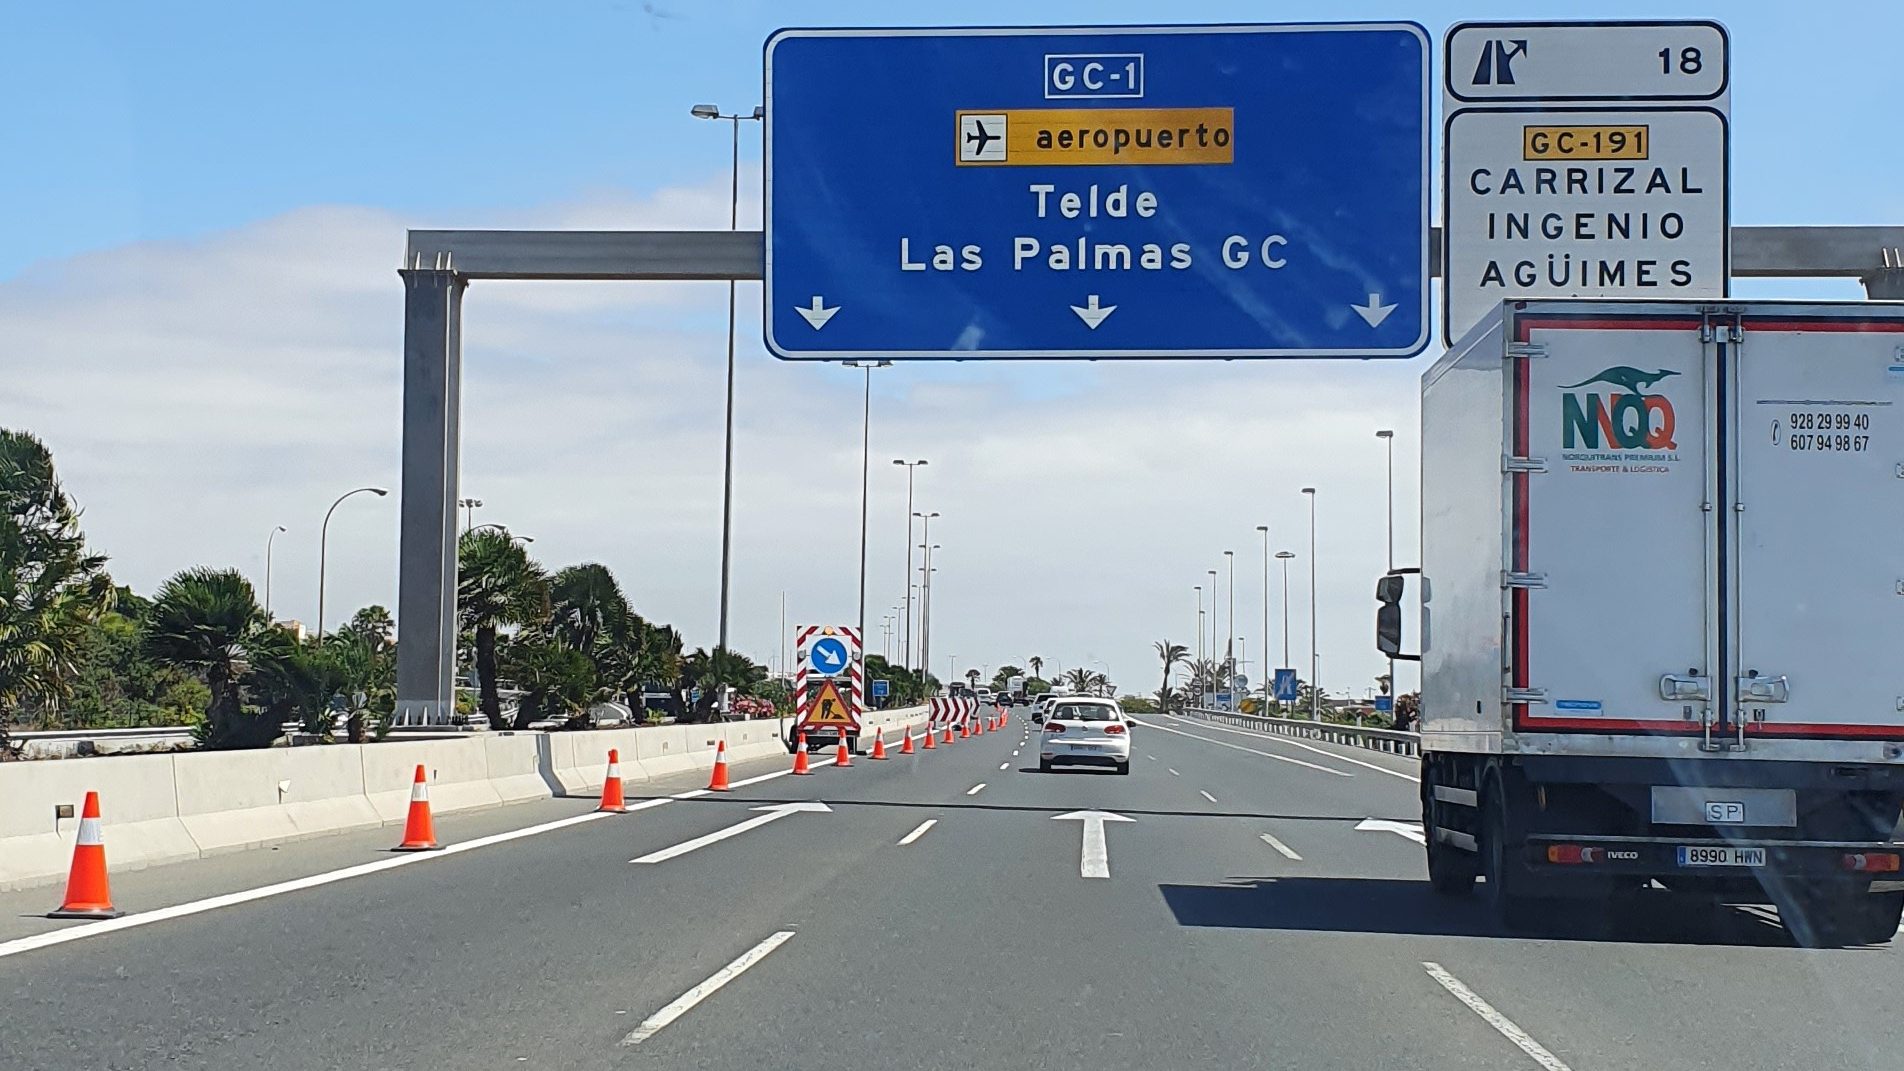 How to get from Gran Canaria airport to Las Palmas?